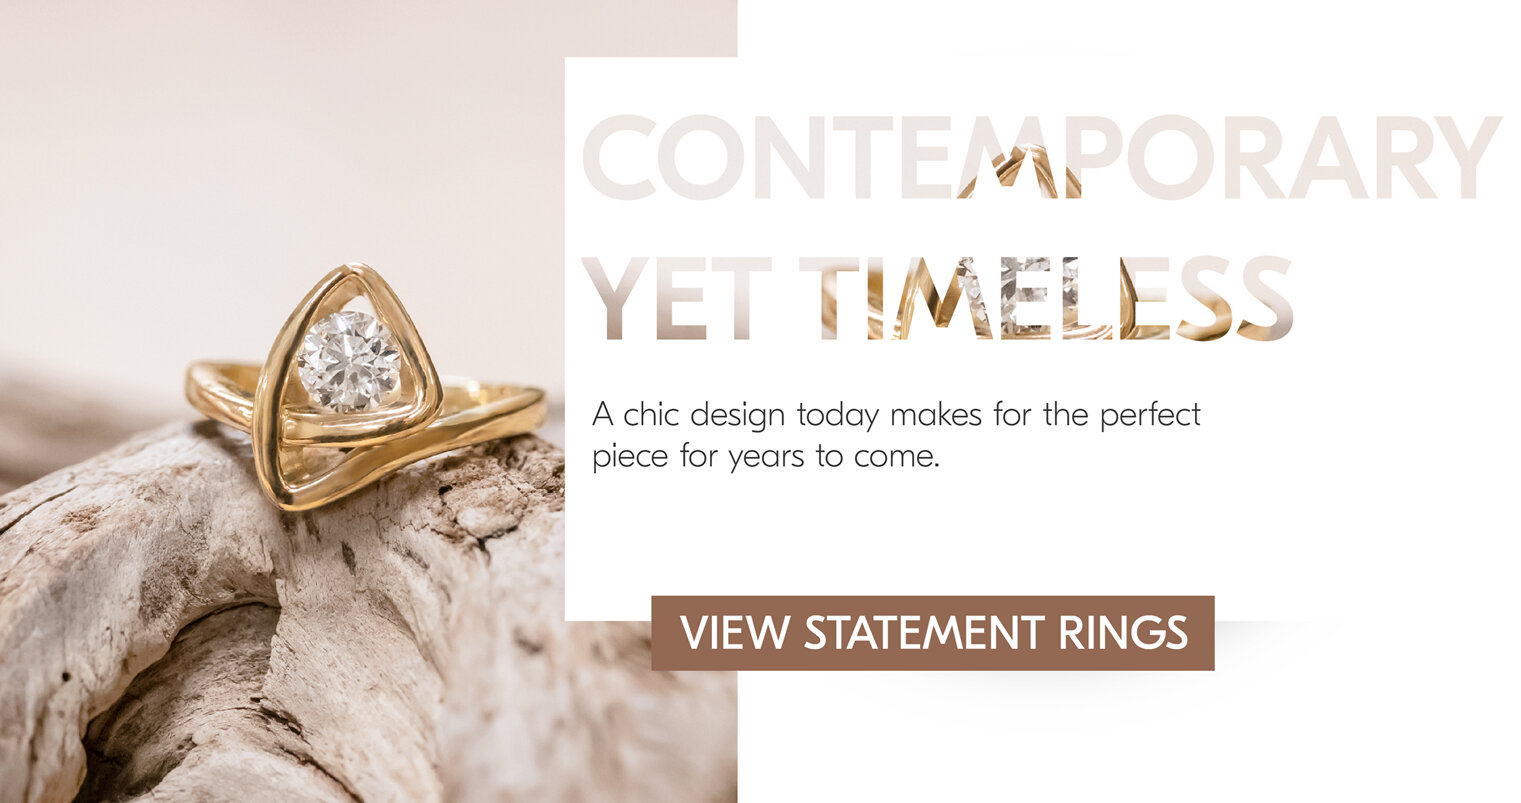 NZ Jewellery Designers. Engagement Rings and Gifts | NZ Jewellers - The ...